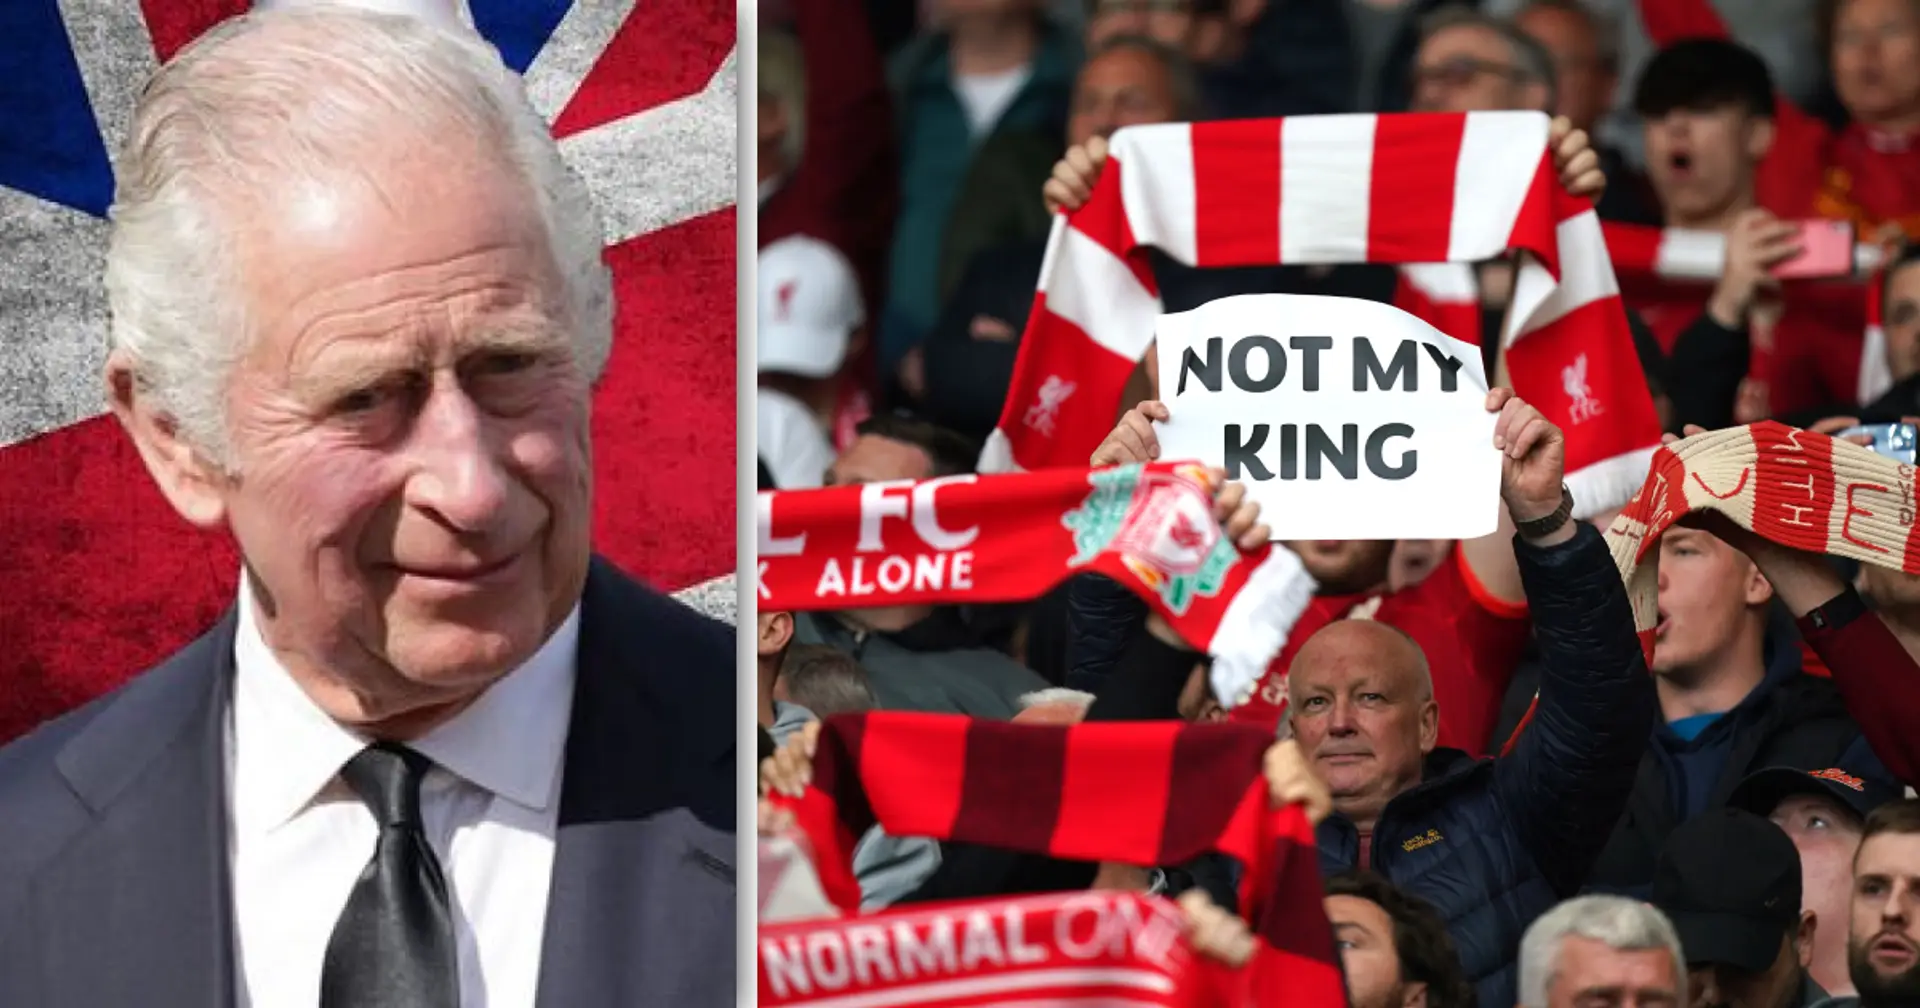 Liverpool fans boo UK national anthem ahead of League Cup final — here is why